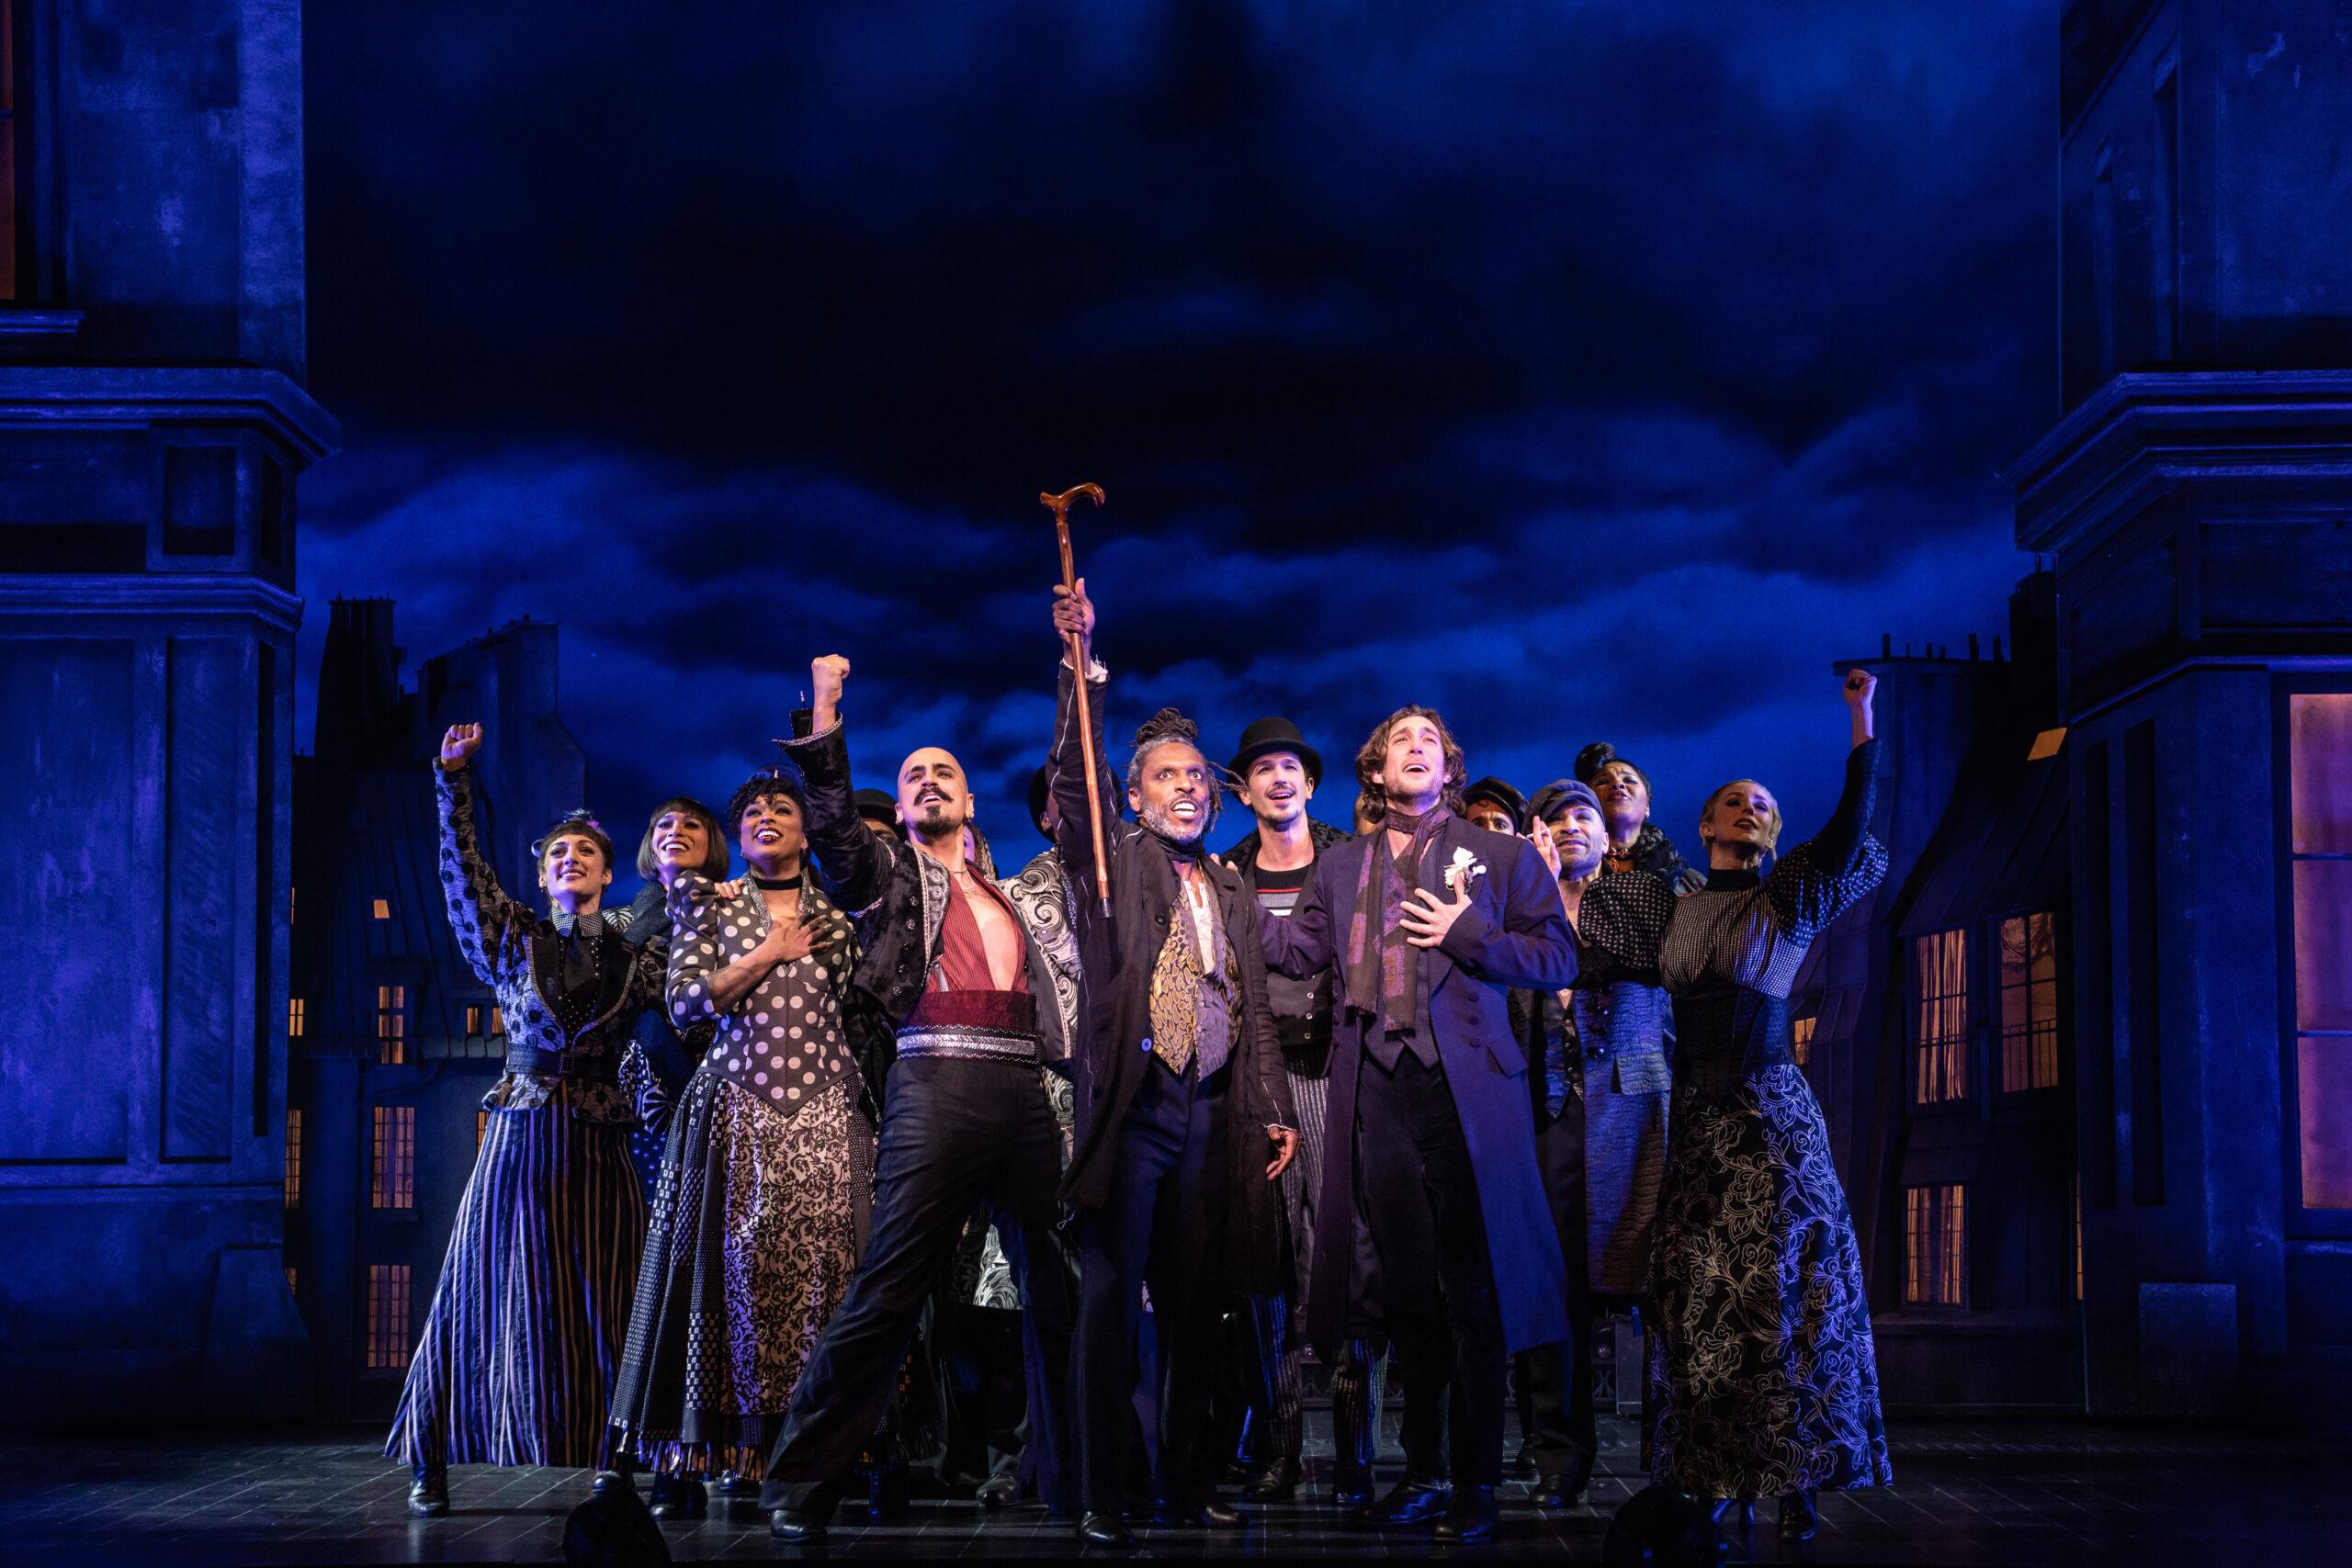 The cast of the Broadway touring company of Moulin Rouge! The Musical, which is opening at the Denver Center for the Performing Arts' Buell Theatre.